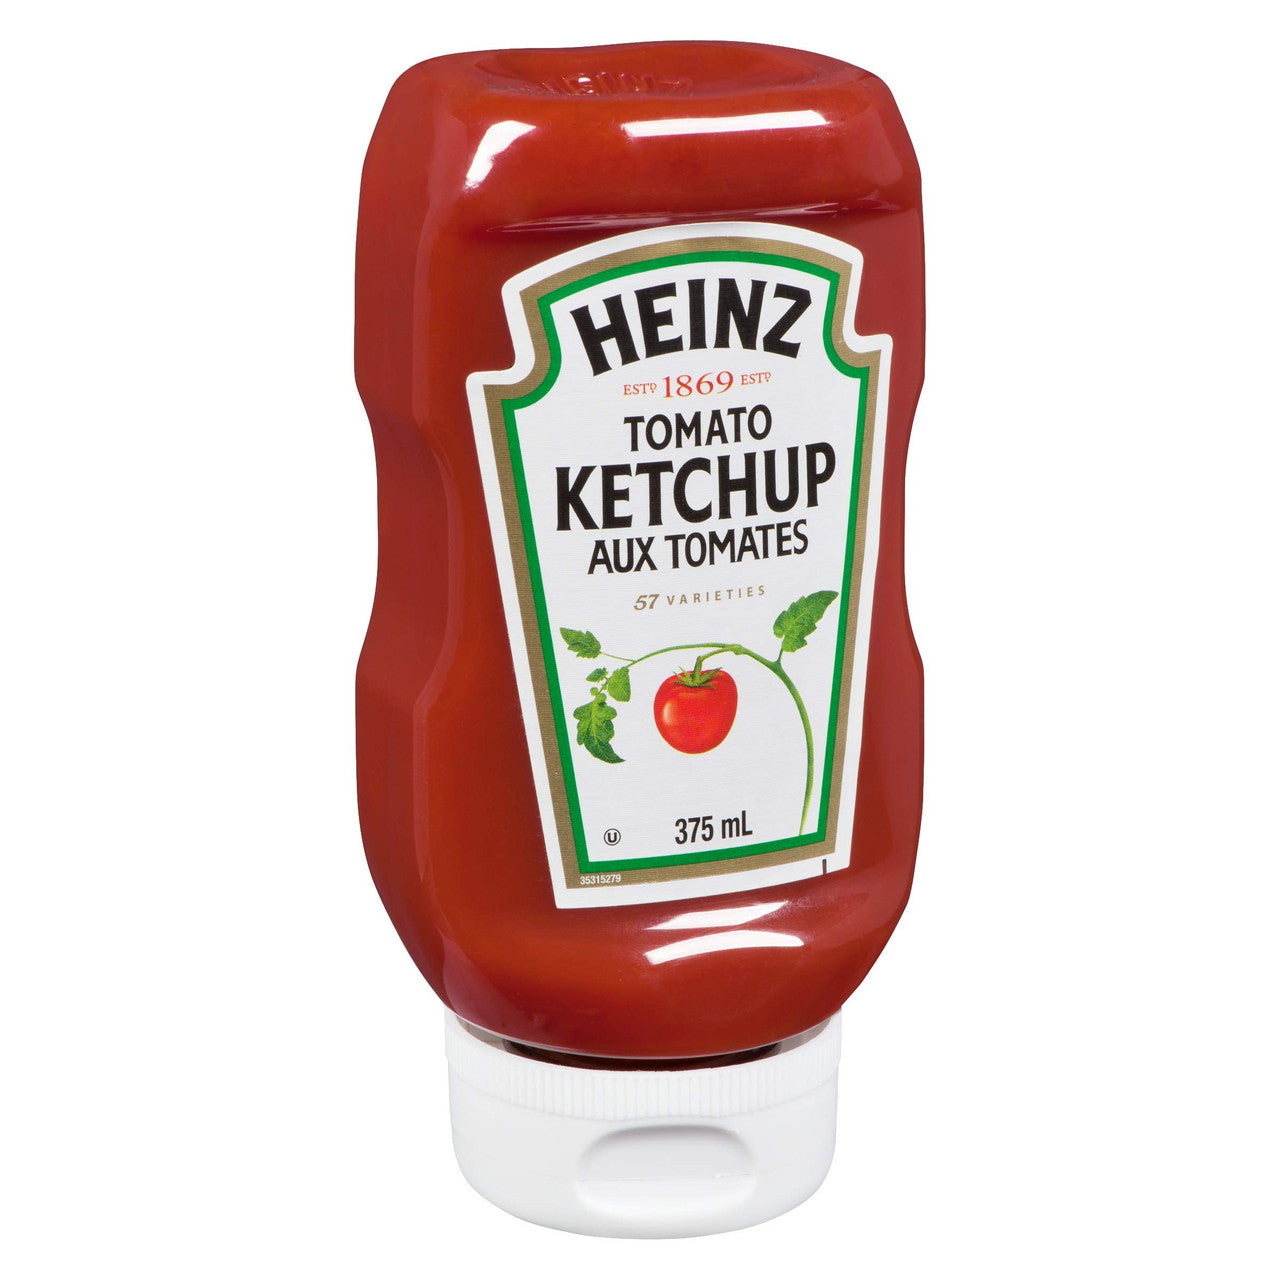 Heinz Tomato Ketchup 375ml - {Imported from Canada}